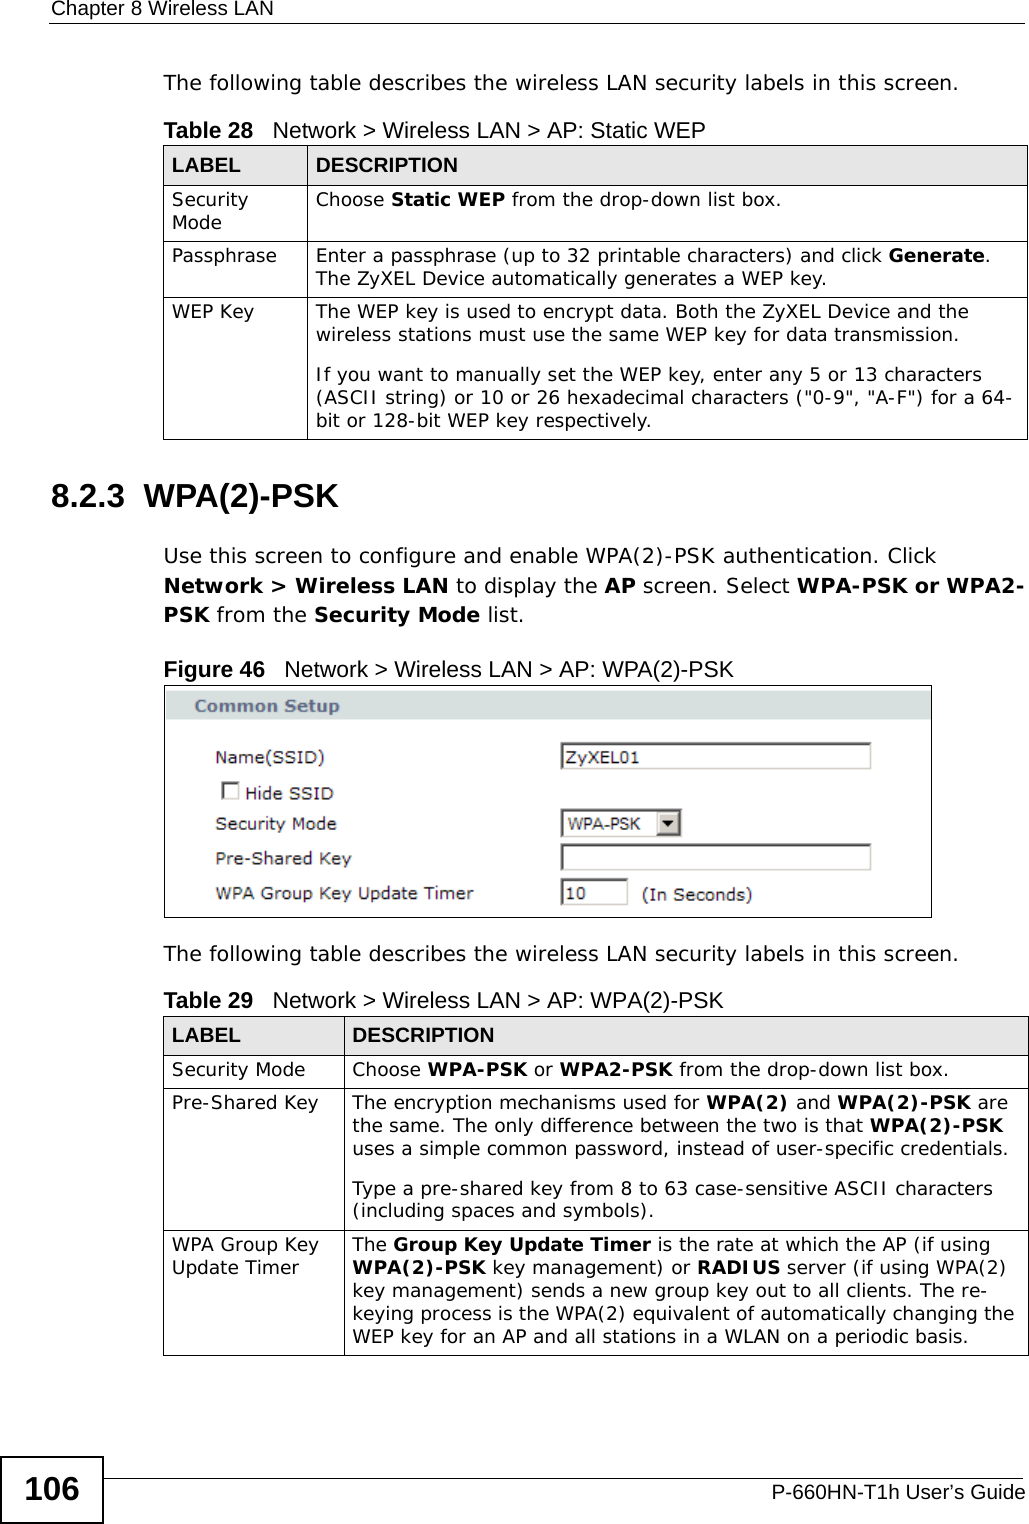 Chapter 8 Wireless LANP-660HN-T1h User’s Guide106The following table describes the wireless LAN security labels in this screen.8.2.3  WPA(2)-PSKUse this screen to configure and enable WPA(2)-PSK authentication. Click Network &gt; Wireless LAN to display the AP screen. Select WPA-PSK or WPA2-PSK from the Security Mode list.Figure 46   Network &gt; Wireless LAN &gt; AP: WPA(2)-PSKThe following table describes the wireless LAN security labels in this screen.Table 28   Network &gt; Wireless LAN &gt; AP: Static WEPLABEL DESCRIPTIONSecurity Mode Choose Static WEP from the drop-down list box.Passphrase Enter a passphrase (up to 32 printable characters) and click Generate. The ZyXEL Device automatically generates a WEP key.WEP Key The WEP key is used to encrypt data. Both the ZyXEL Device and the wireless stations must use the same WEP key for data transmission.If you want to manually set the WEP key, enter any 5 or 13 characters (ASCII string) or 10 or 26 hexadecimal characters (&quot;0-9&quot;, &quot;A-F&quot;) for a 64-bit or 128-bit WEP key respectively.Table 29   Network &gt; Wireless LAN &gt; AP: WPA(2)-PSKLABEL DESCRIPTIONSecurity Mode Choose WPA-PSK or WPA2-PSK from the drop-down list box.Pre-Shared Key  The encryption mechanisms used for WPA(2) and WPA(2)-PSK are the same. The only difference between the two is that WPA(2)-PSK uses a simple common password, instead of user-specific credentials.Type a pre-shared key from 8 to 63 case-sensitive ASCII characters (including spaces and symbols).WPA Group Key Update Timer The Group Key Update Timer is the rate at which the AP (if using WPA(2)-PSK key management) or RADIUS server (if using WPA(2) key management) sends a new group key out to all clients. The re-keying process is the WPA(2) equivalent of automatically changing the WEP key for an AP and all stations in a WLAN on a periodic basis.